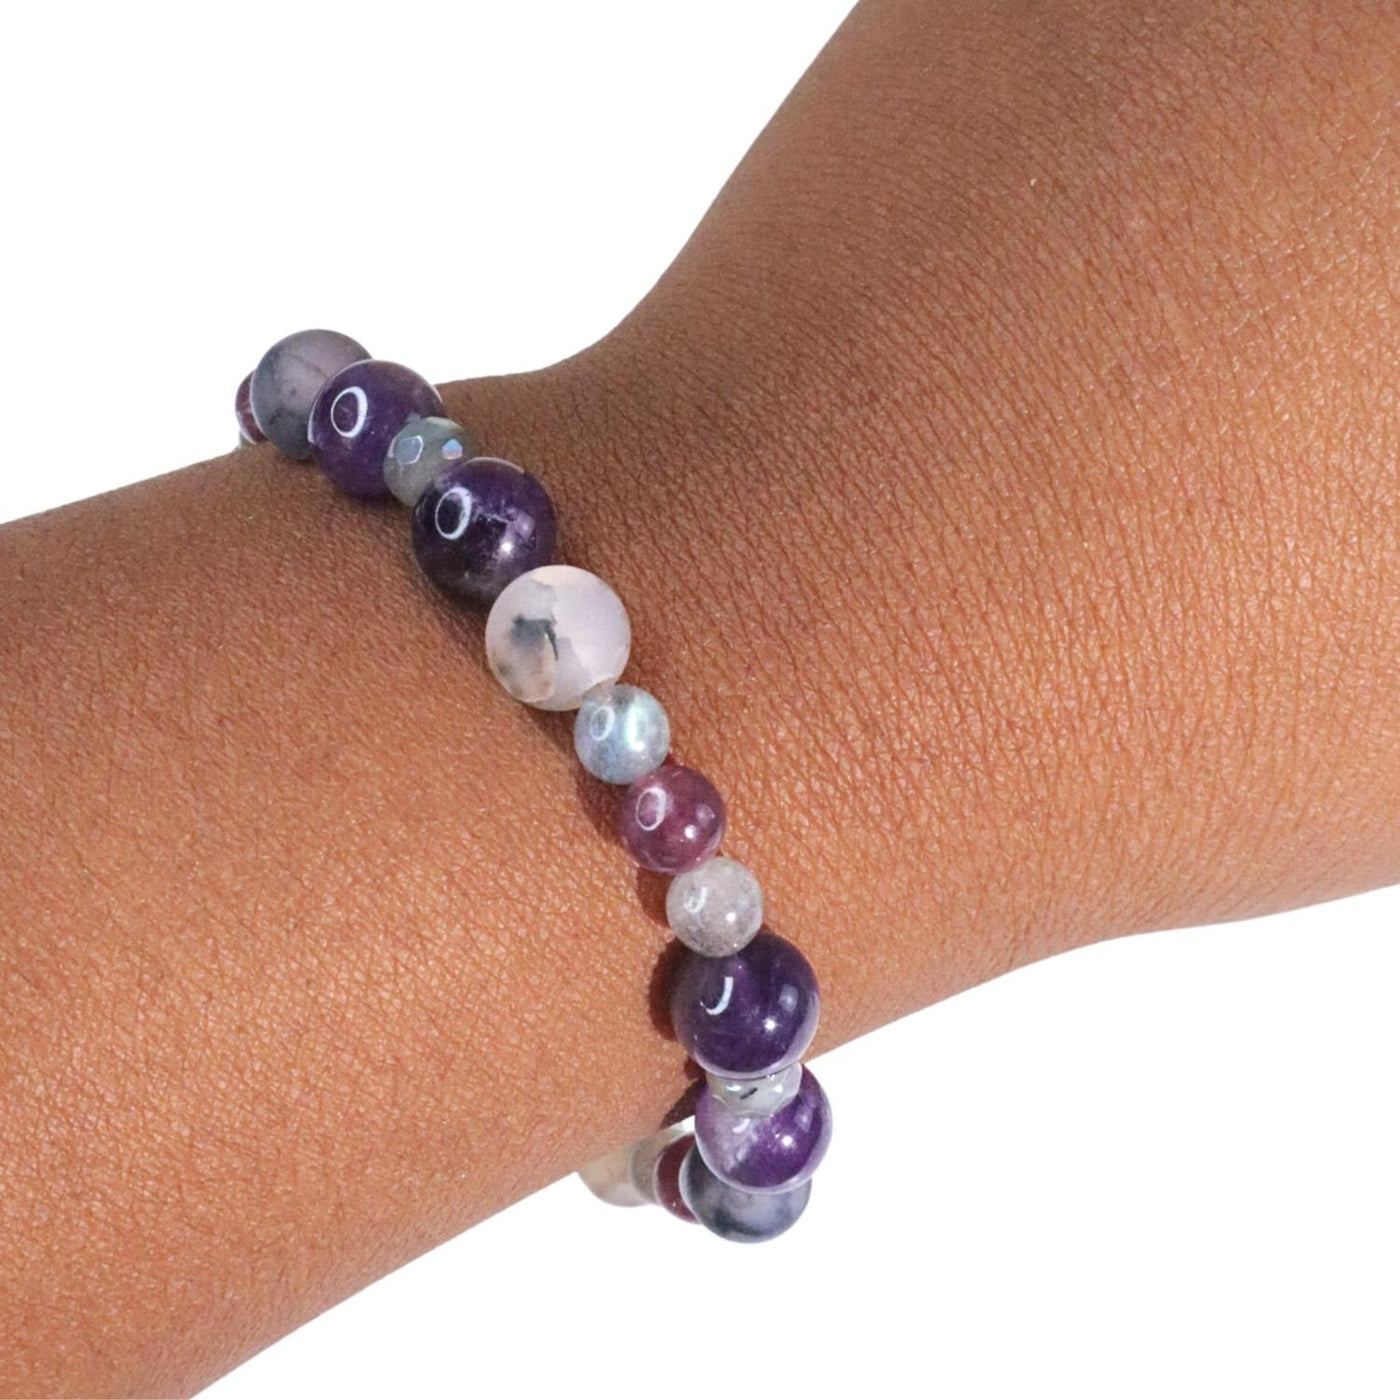 Young Black woman wearing new exclusive crystal formula Miracles Bracelet by Energy Muse featuring Amethyst, Lepidolite, Web Agate, Labradorite, and Aura Gray Moonstone on her left wrist.